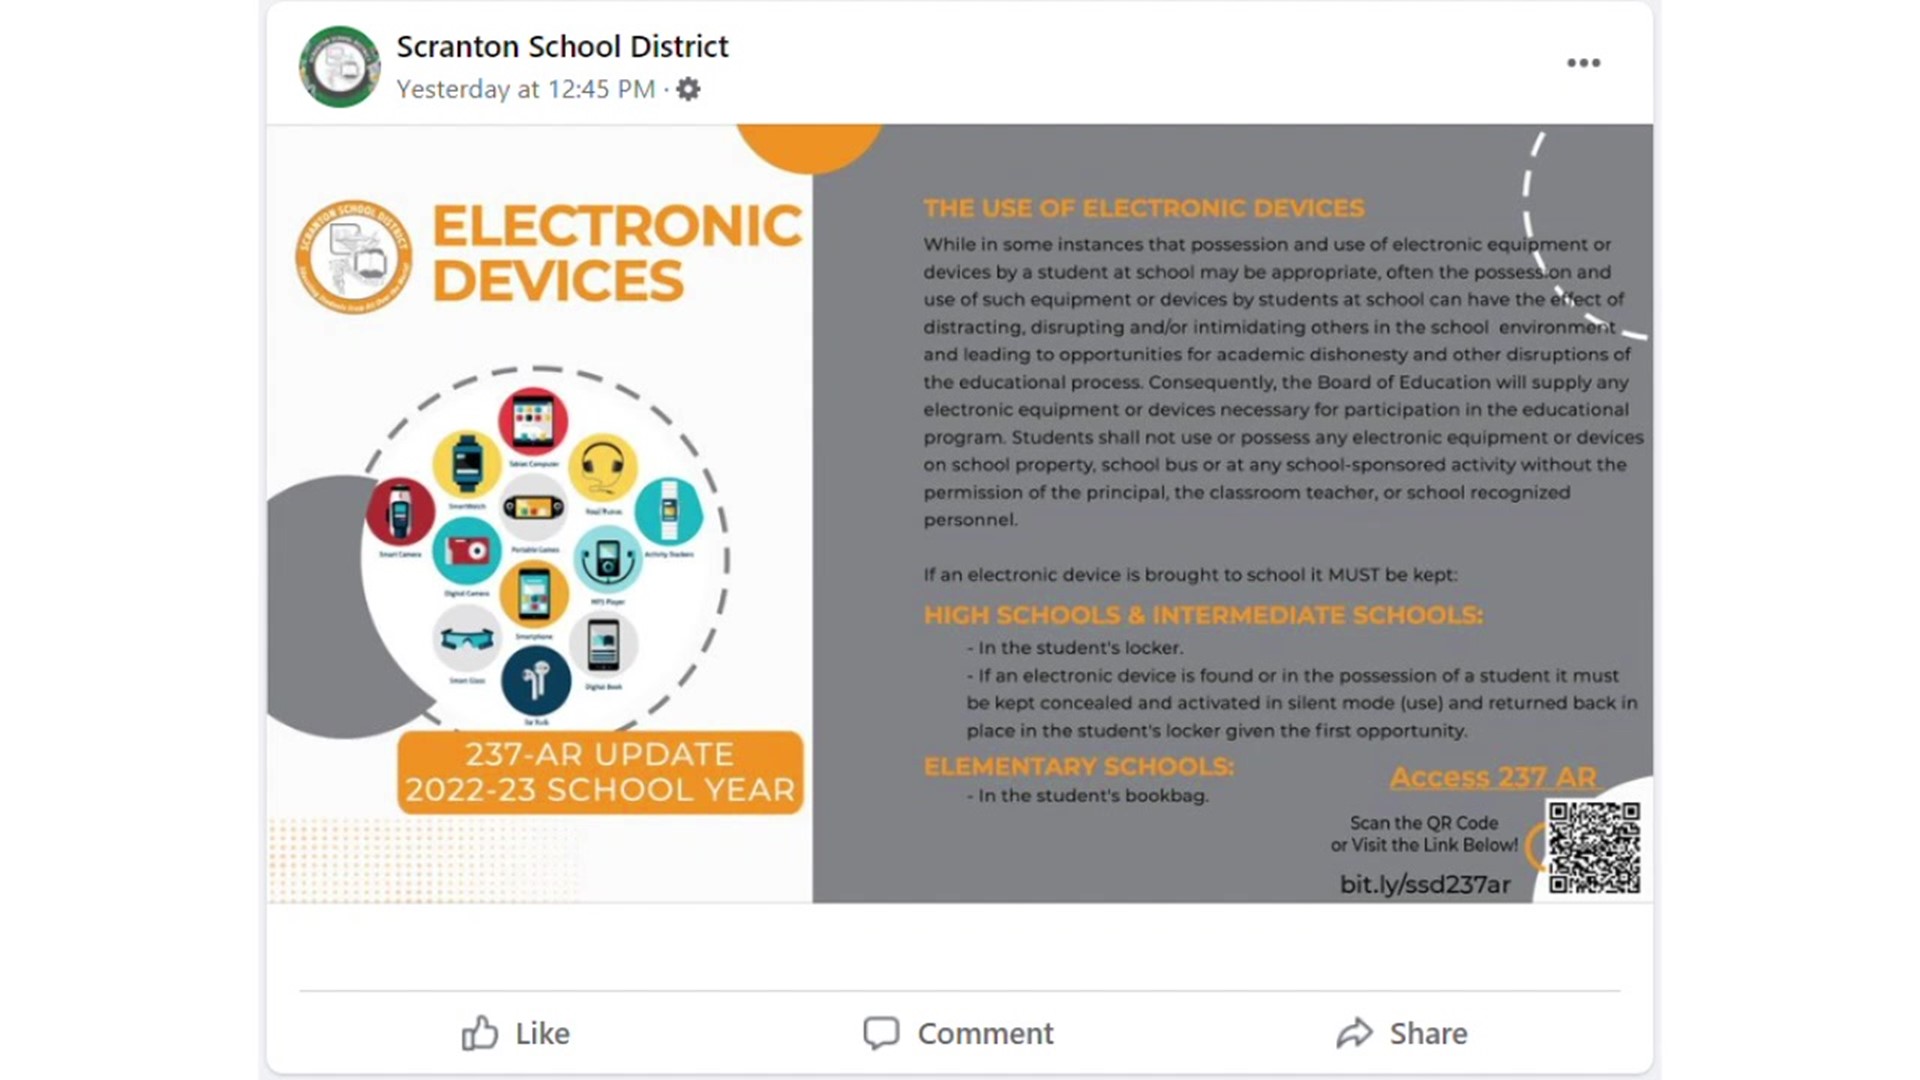 Put your phones away. That’s the message to students in the Scranton School District after new restrictions on electronic devices and bags on school grounds.